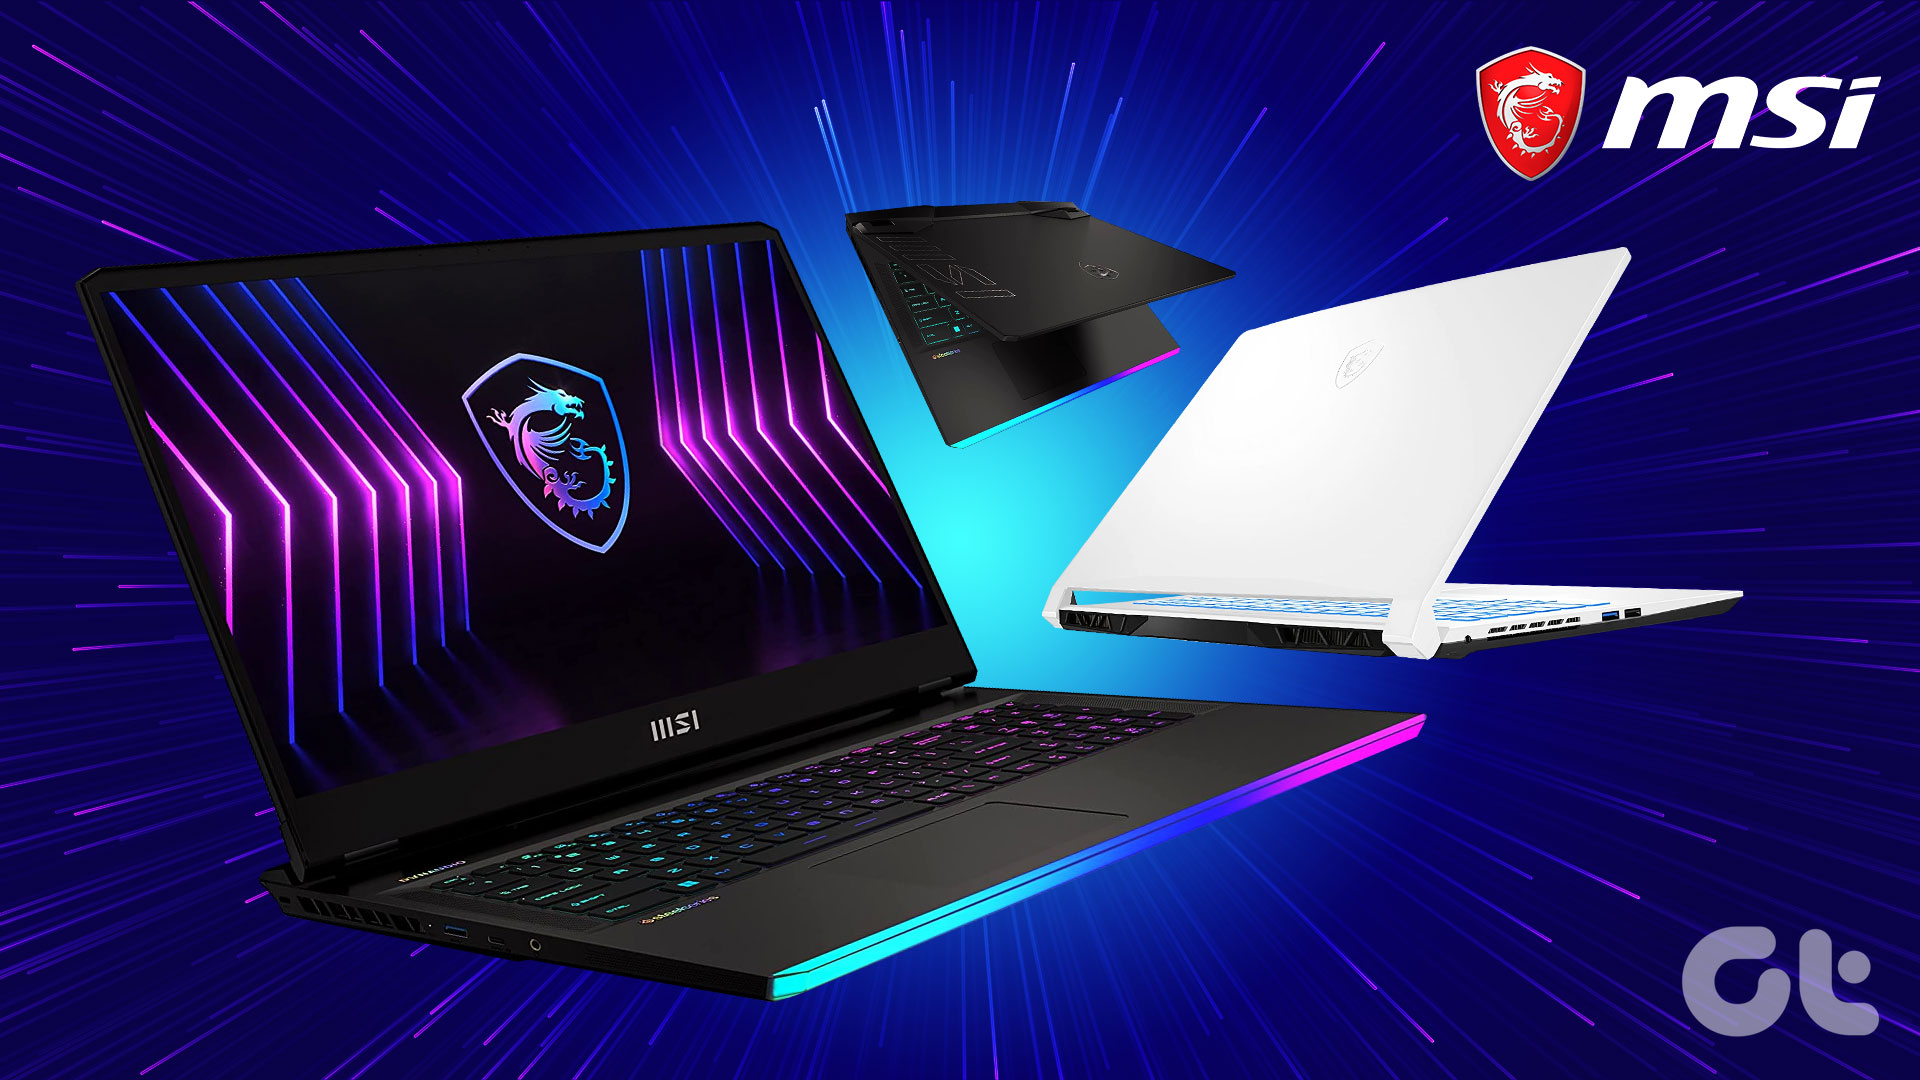 5 Best MSI Gaming Laptops for All Budgets